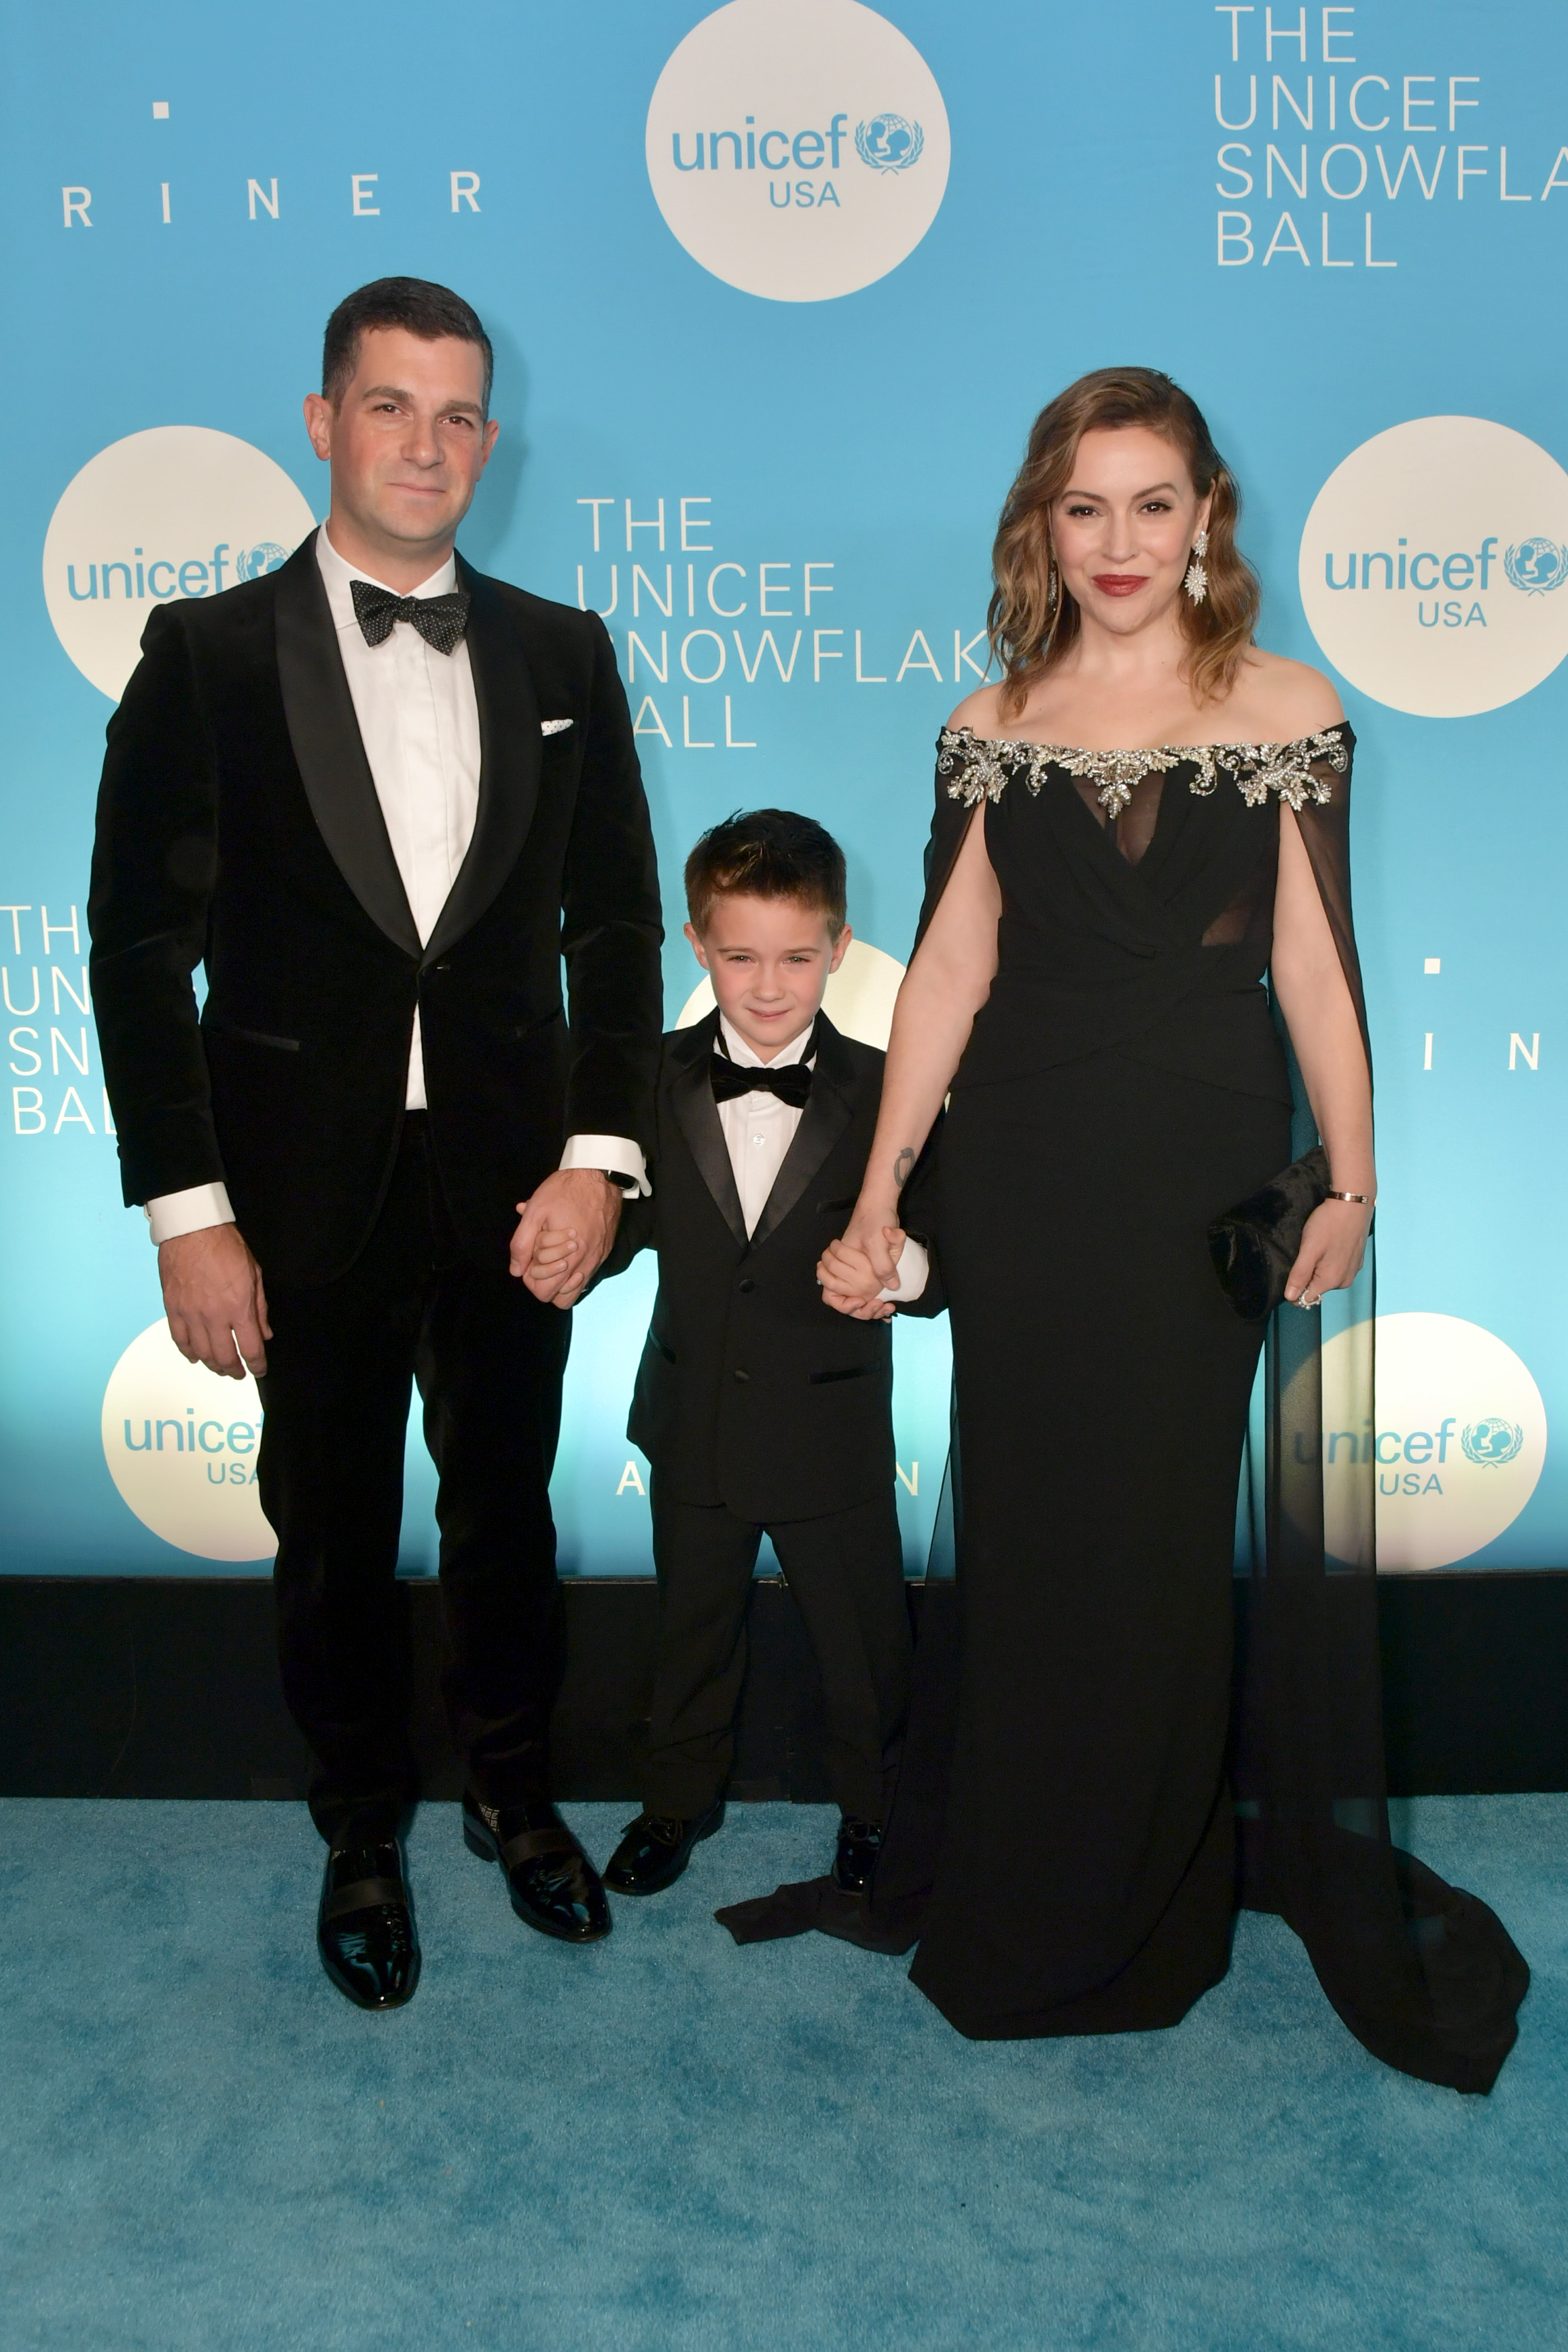 David and Milo Bugliari with Alyssa Milano at the 14th Annual UNICEF Snowflake Ball in New York City on November 27, 2018 | Source: Getty Images